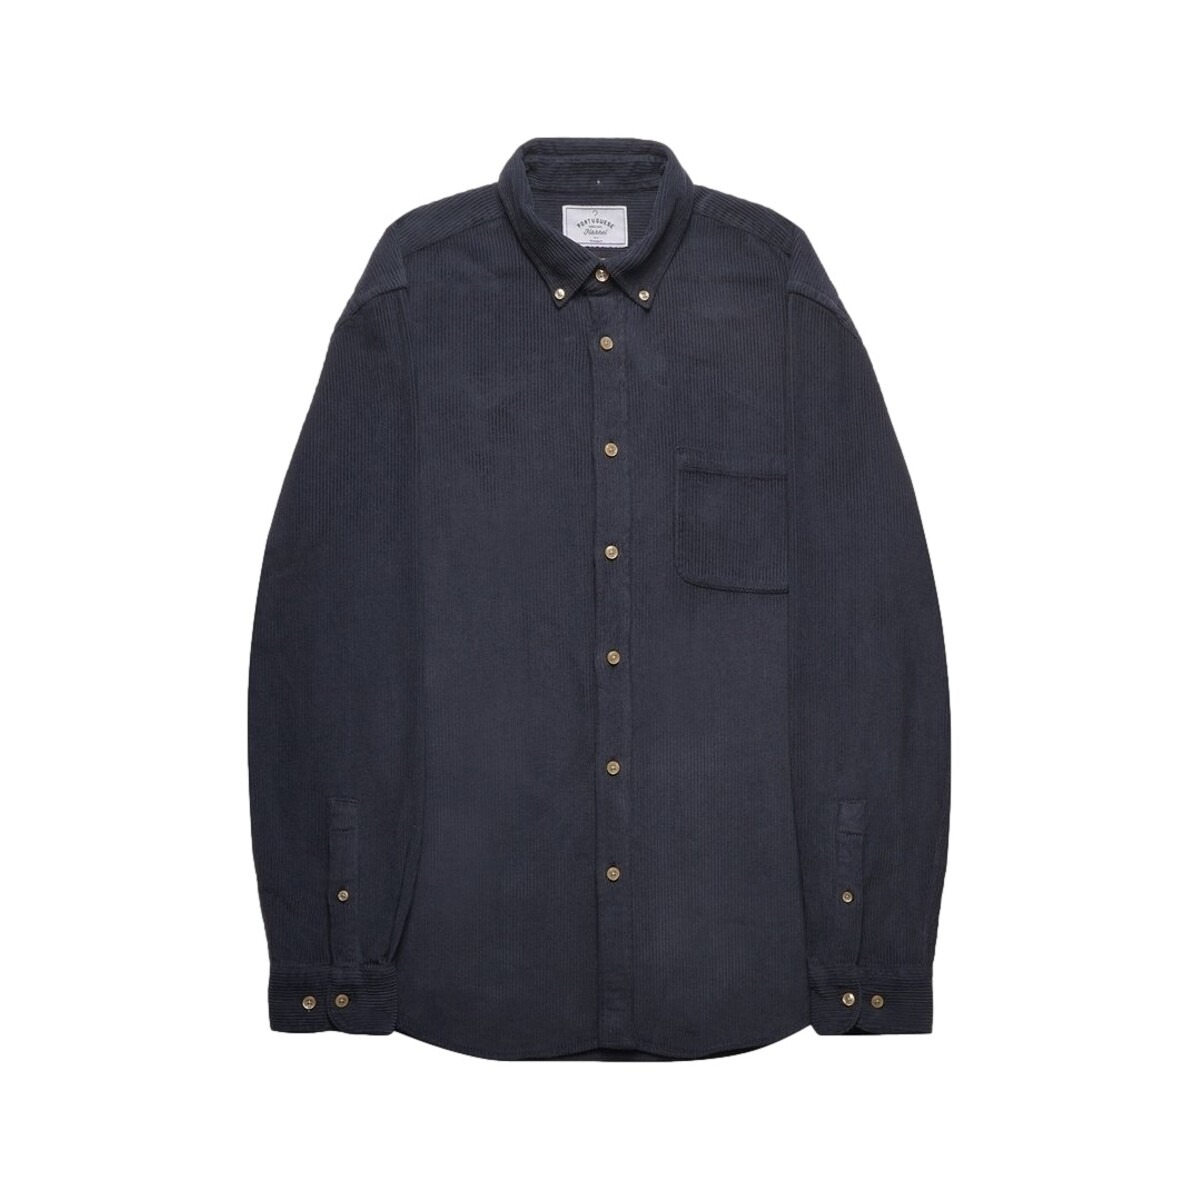 Spartoo - Gents Shirt Blue from Portuguese Flannel GOOFASH